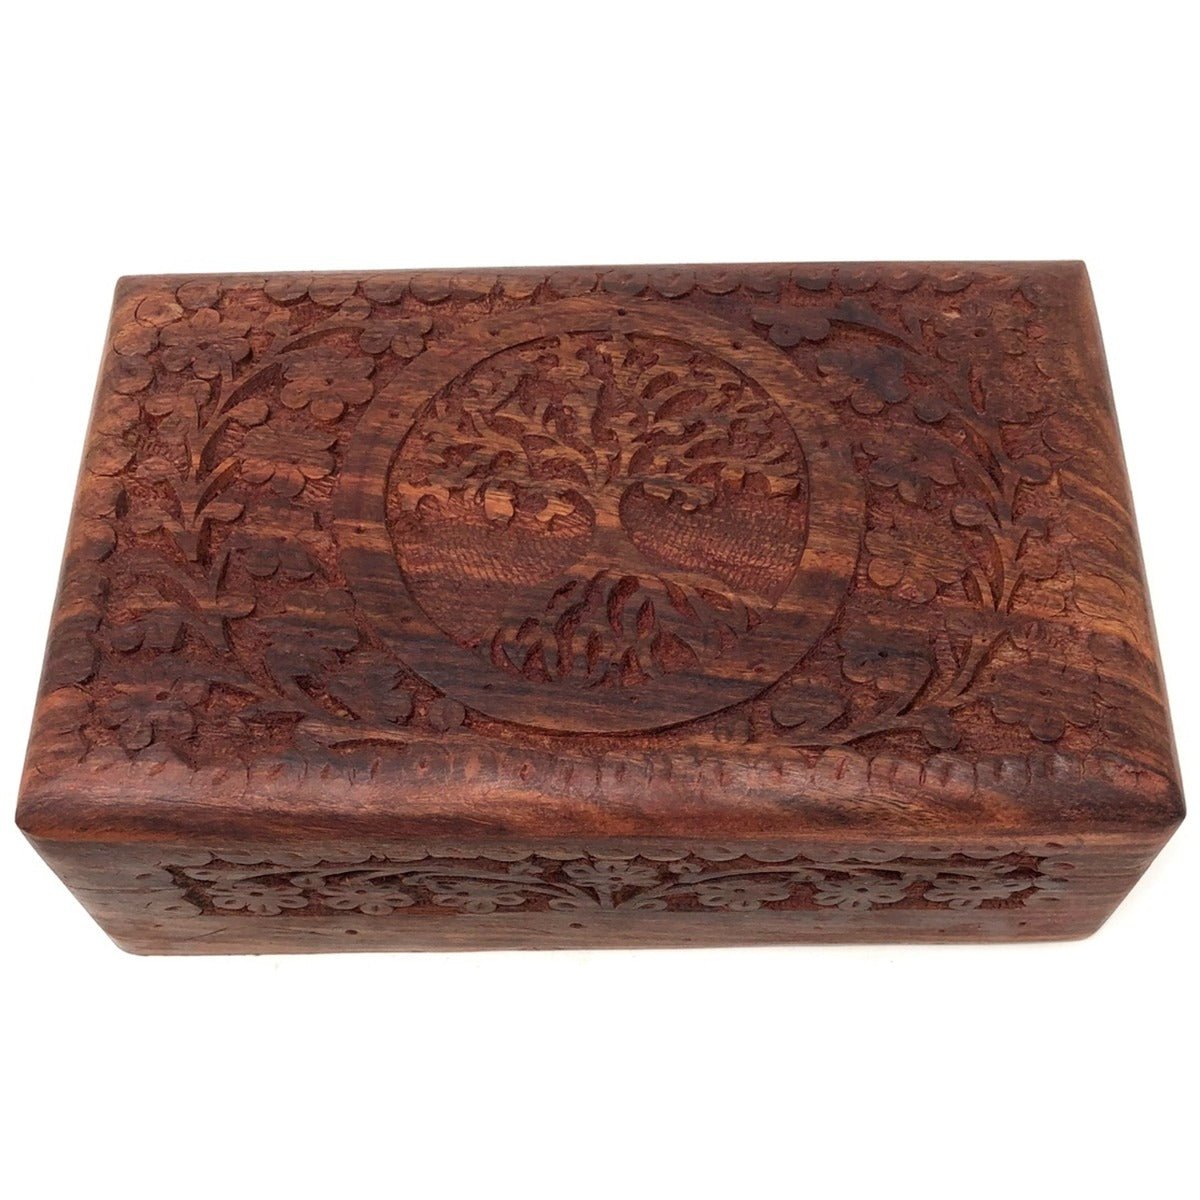 Tree of Life Elaborate Carved Box - 13 Moons